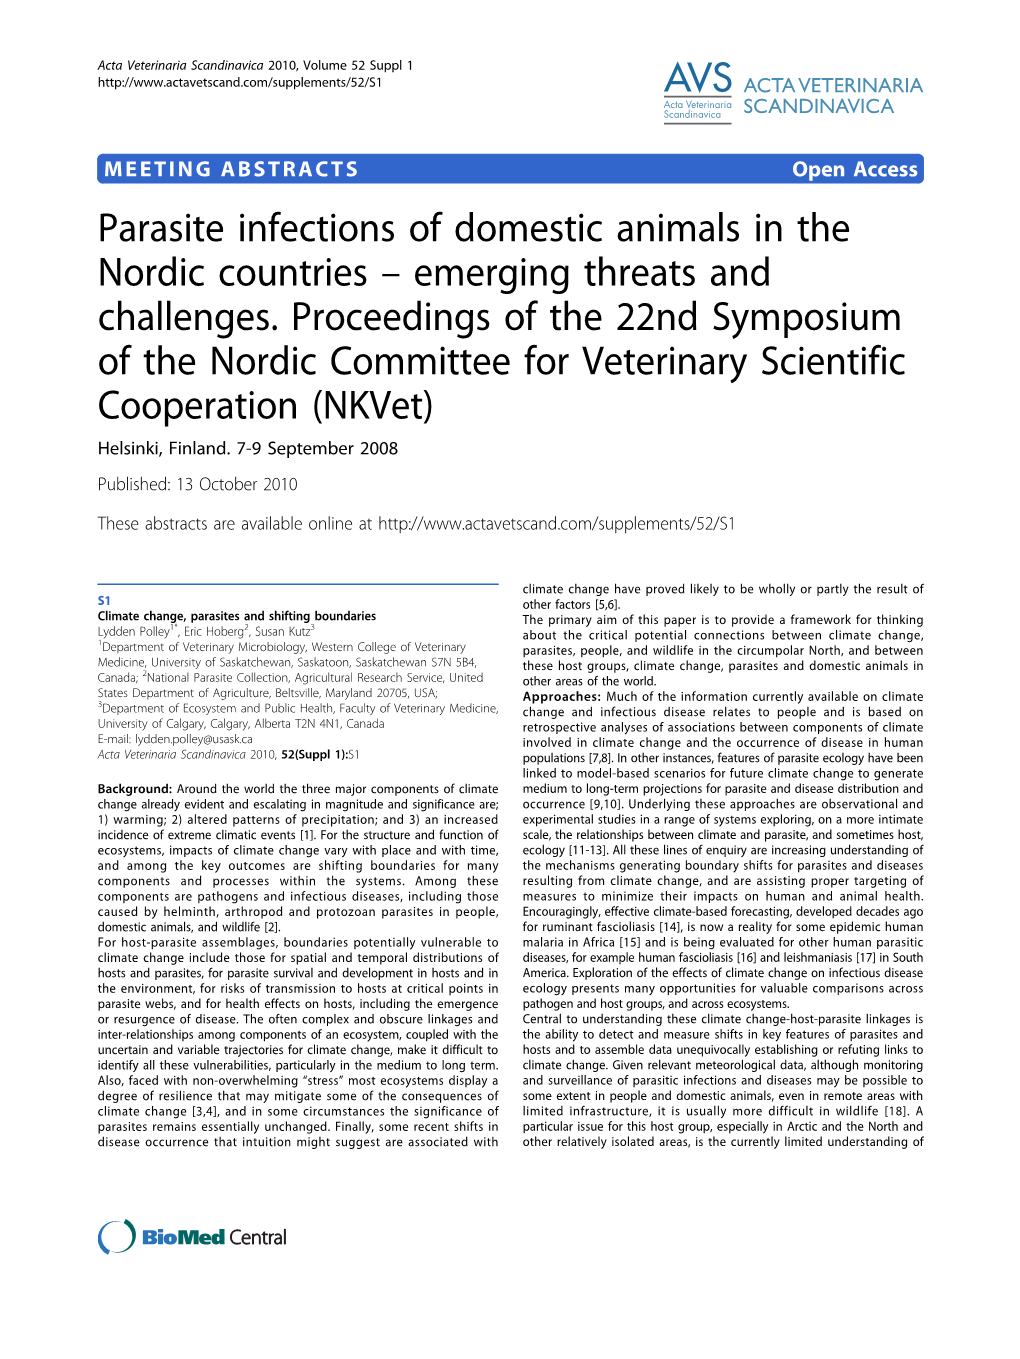 Parasite Infections of Domestic Animals in the Nordic Countries – Emerging Threats and Challenges